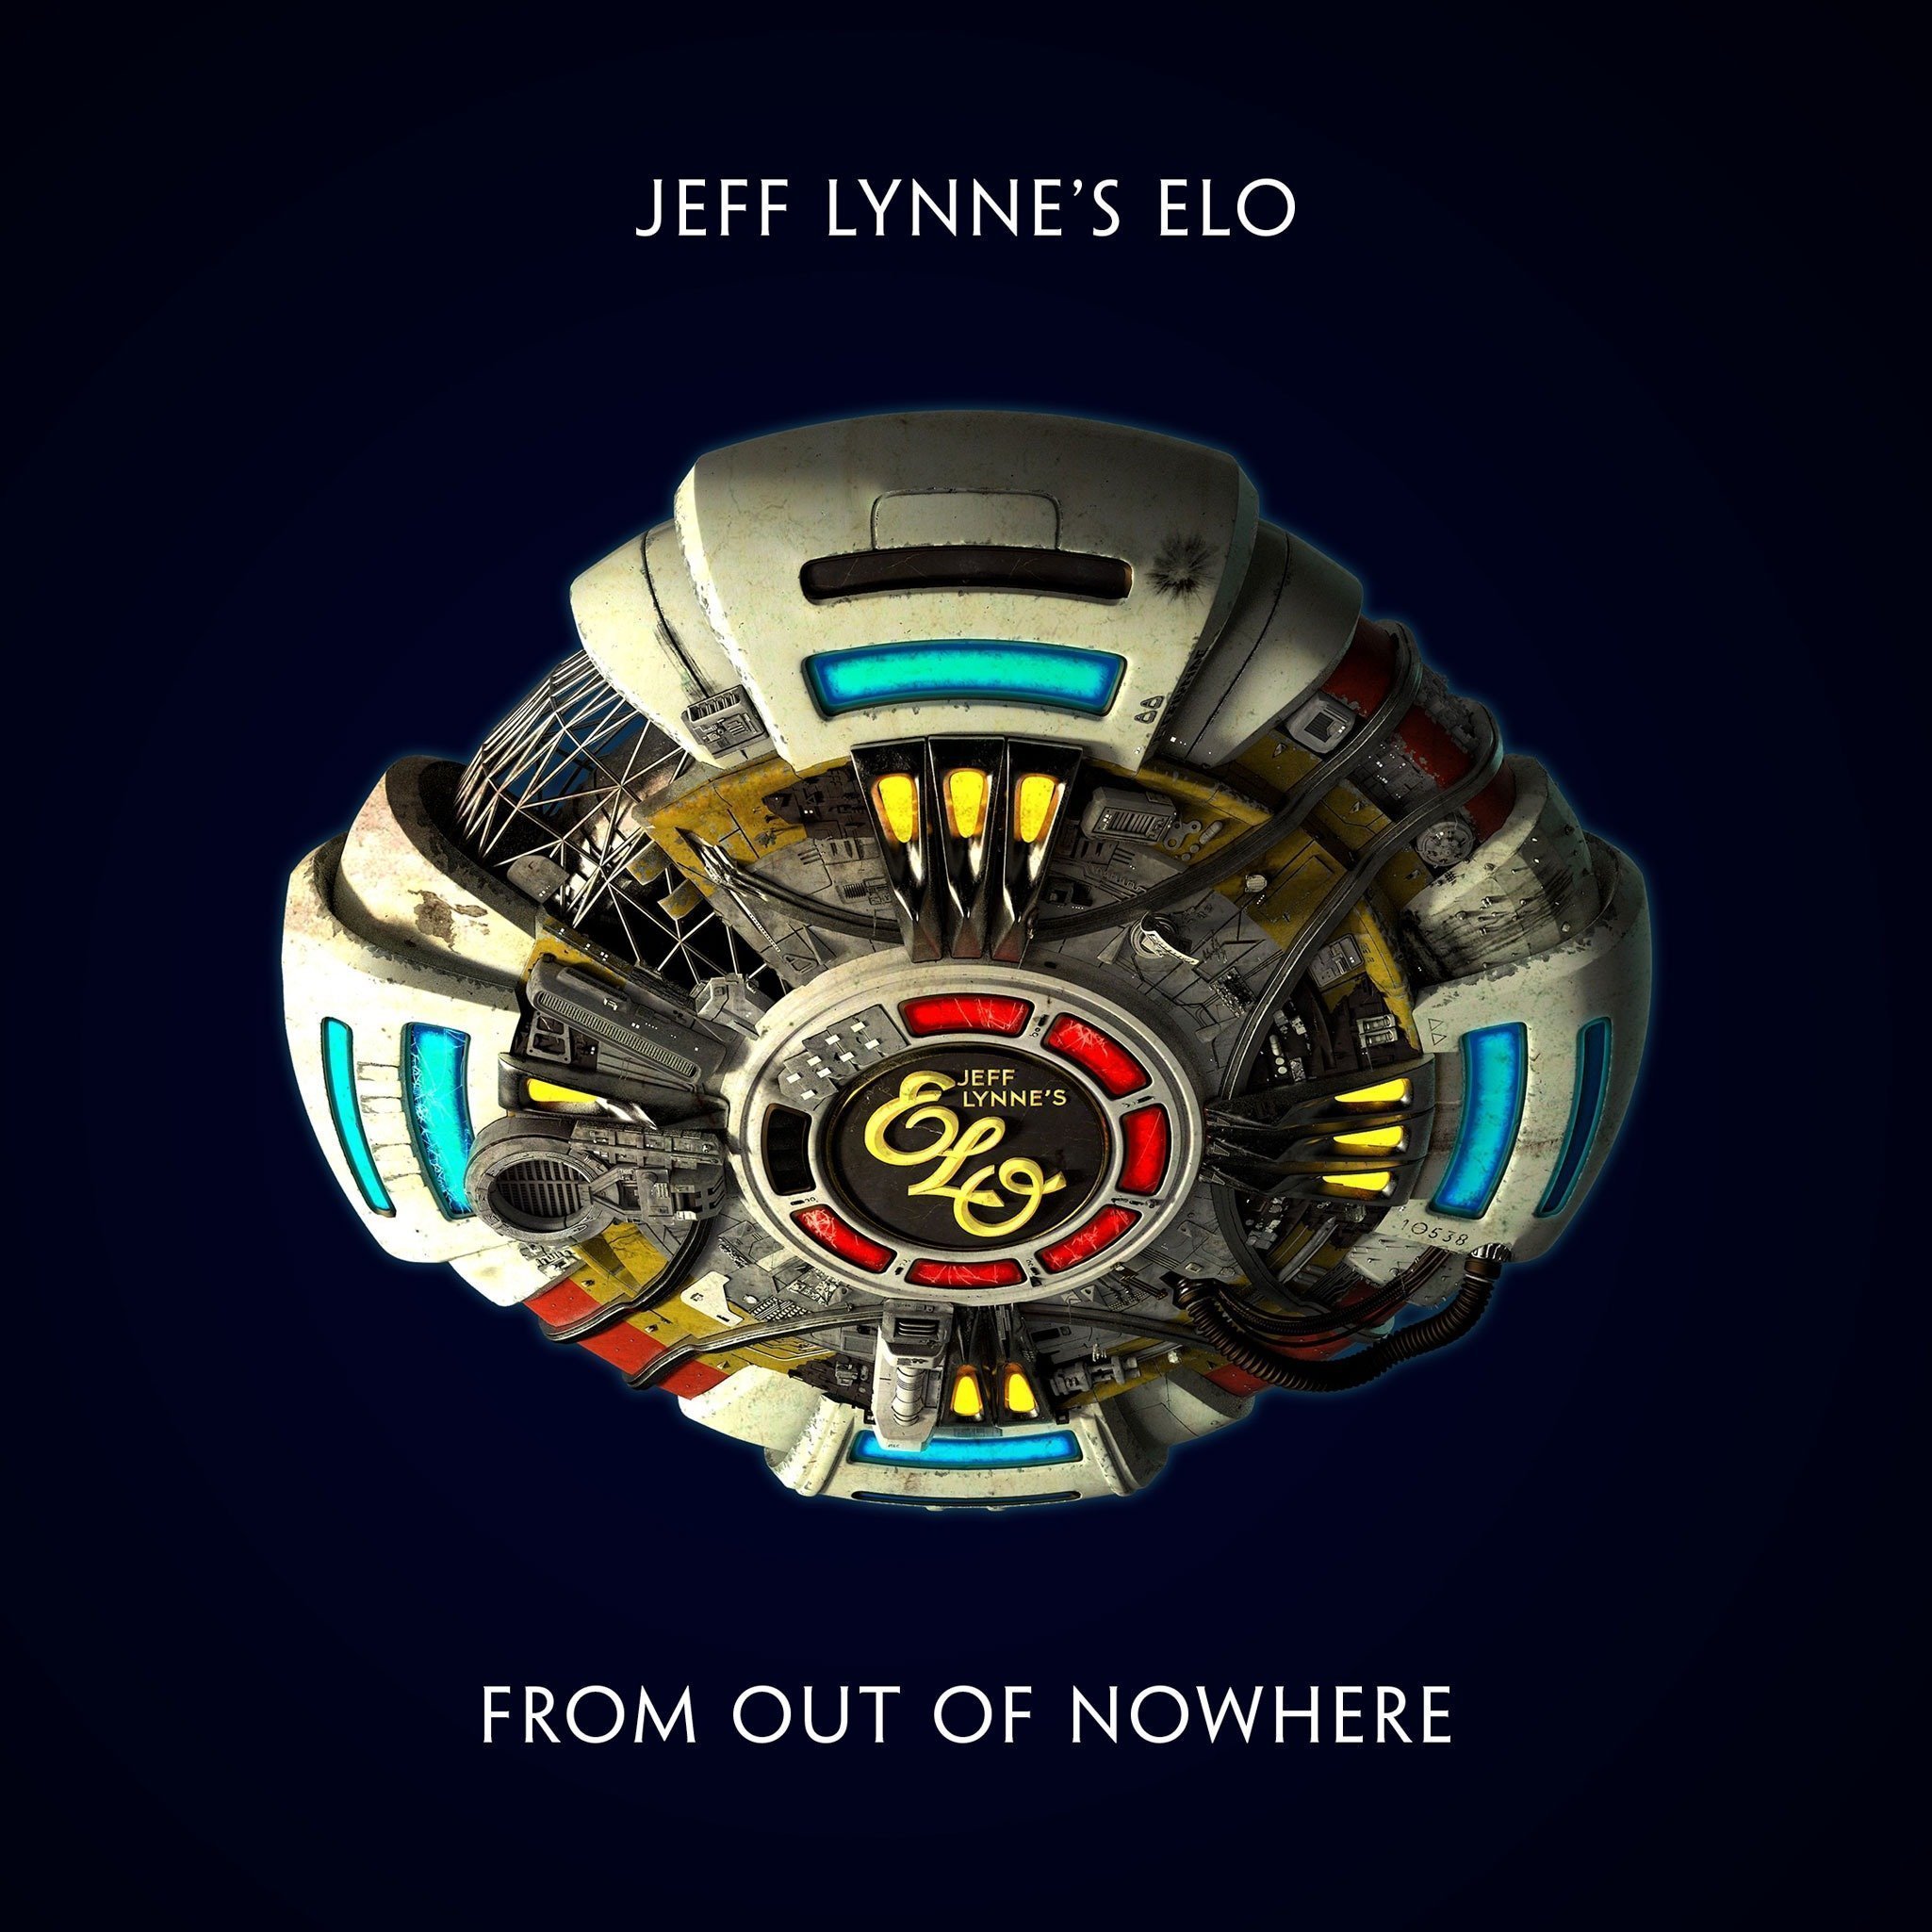 JEFF LYNNE’S ELO set to release new album, 'From Out of Nowhere' on November 1st 